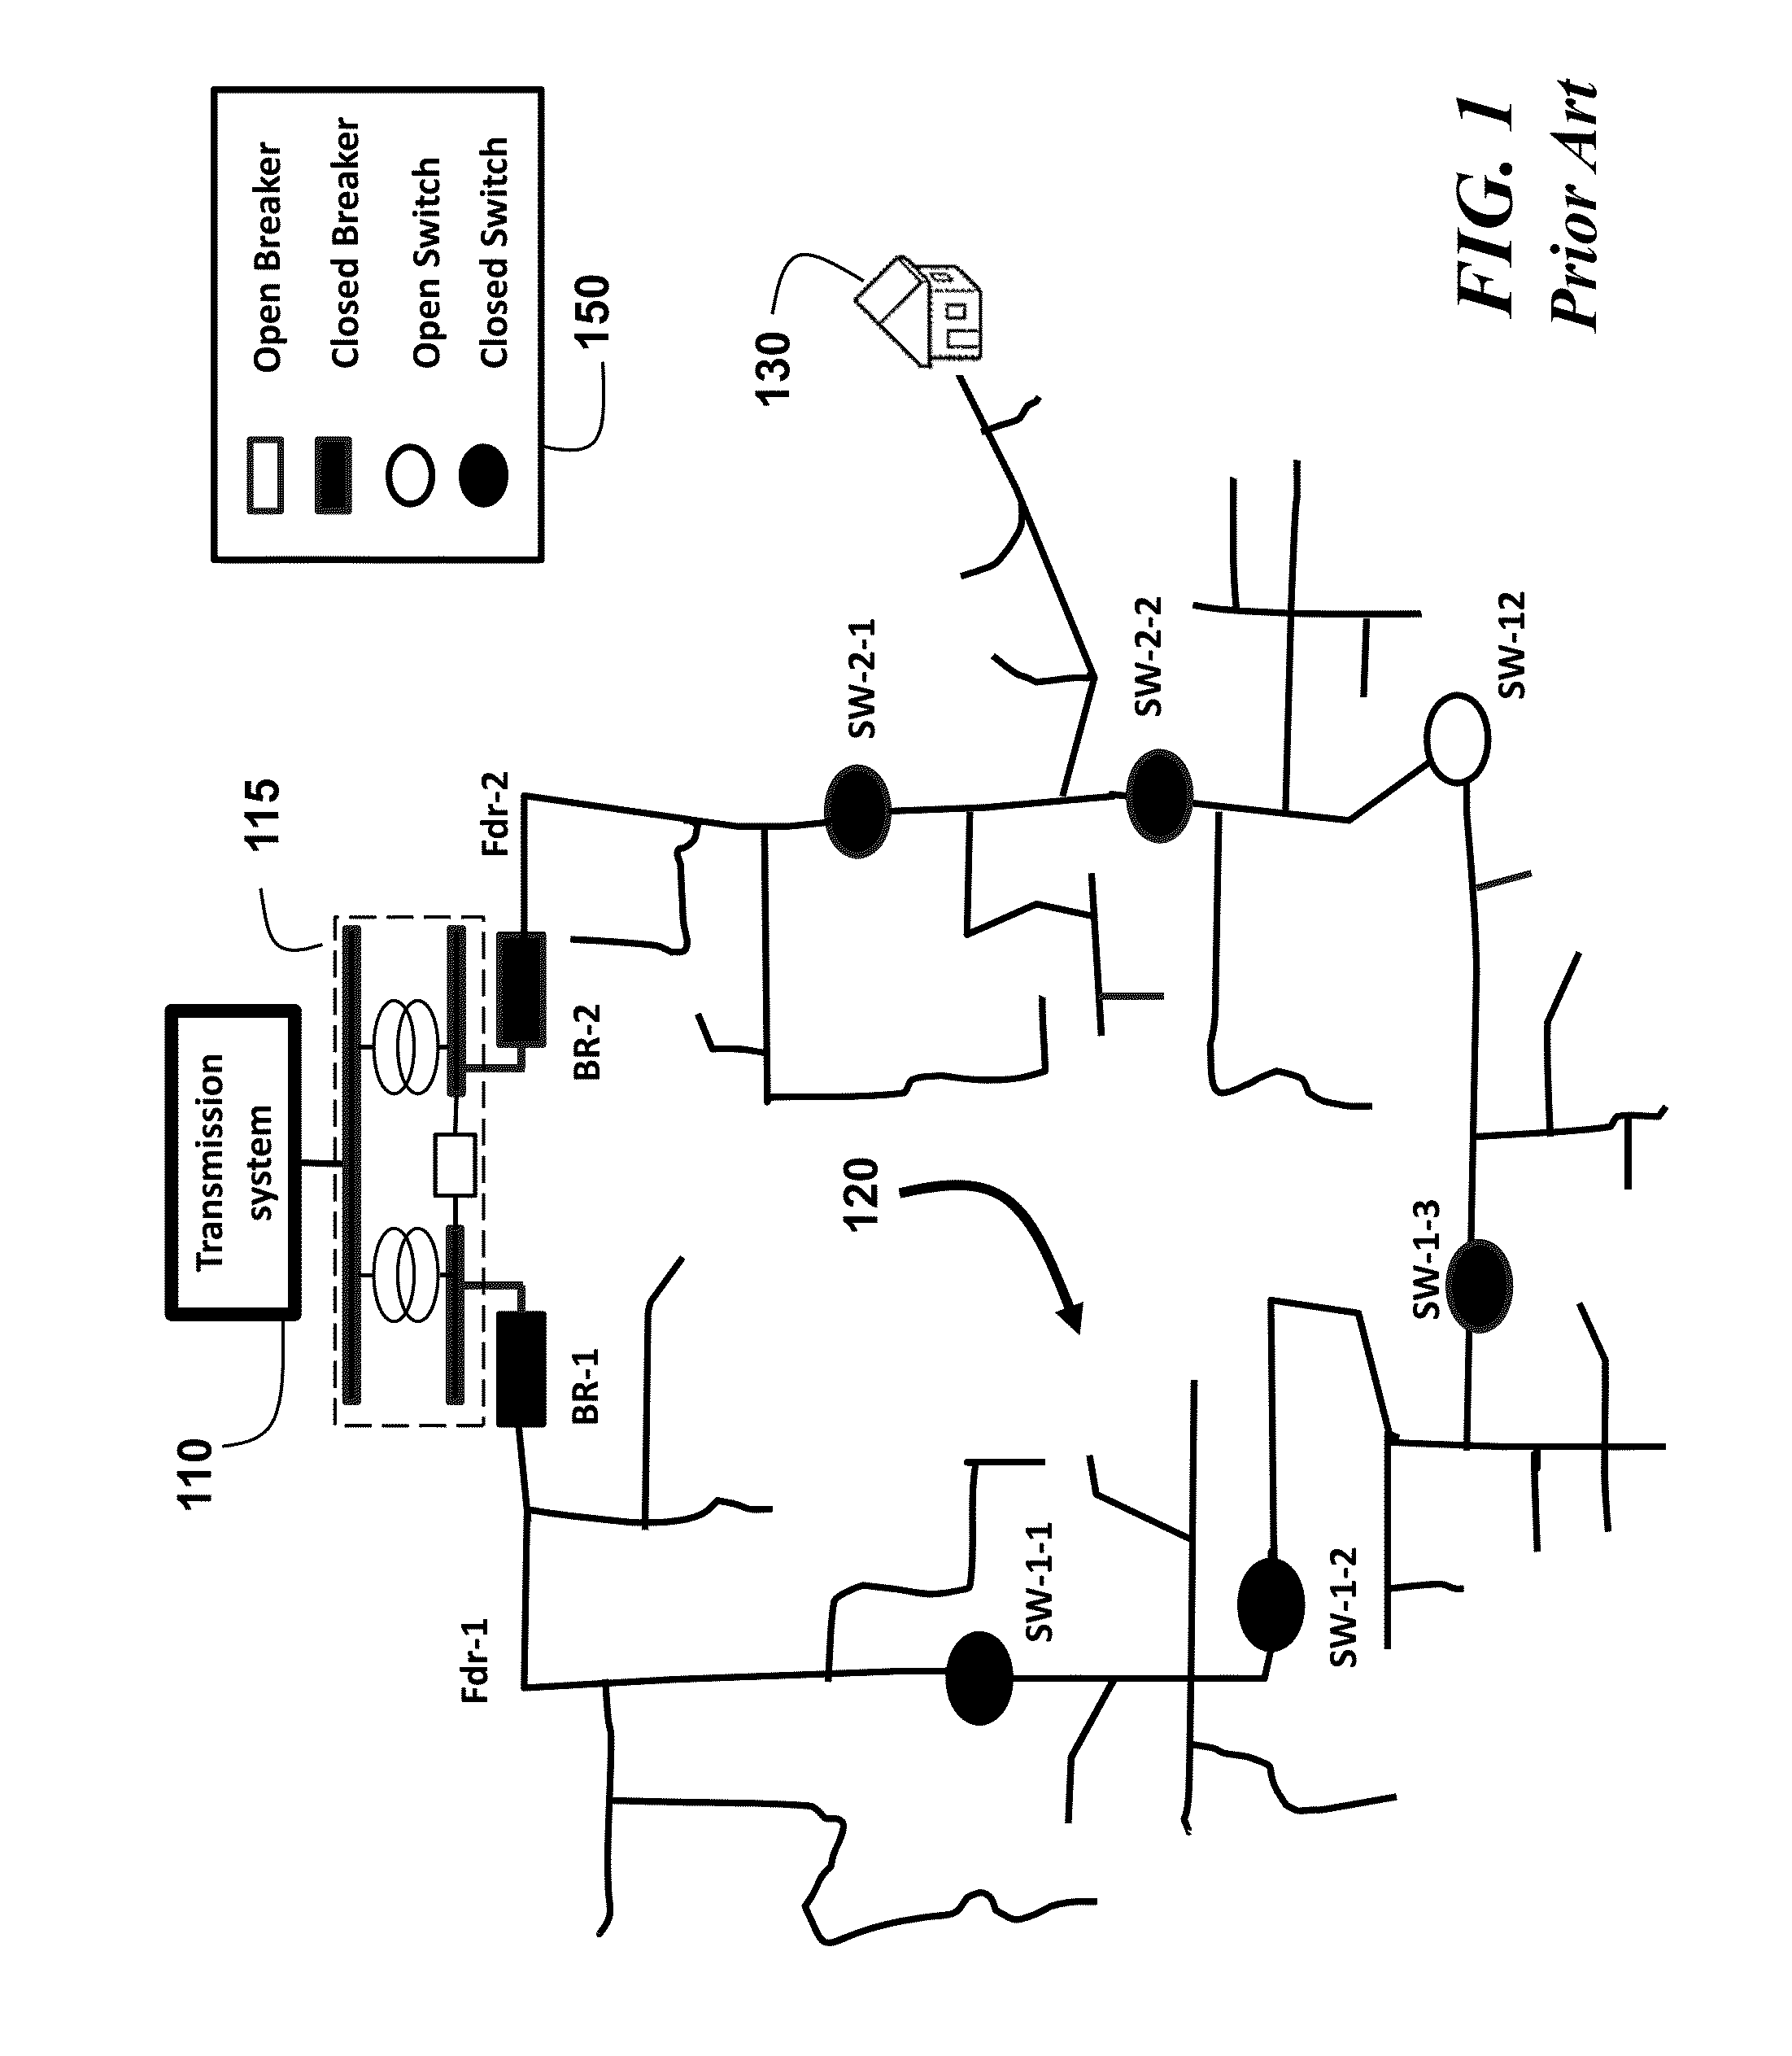 Dynamic and Adaptive Configurable Power Distribution System